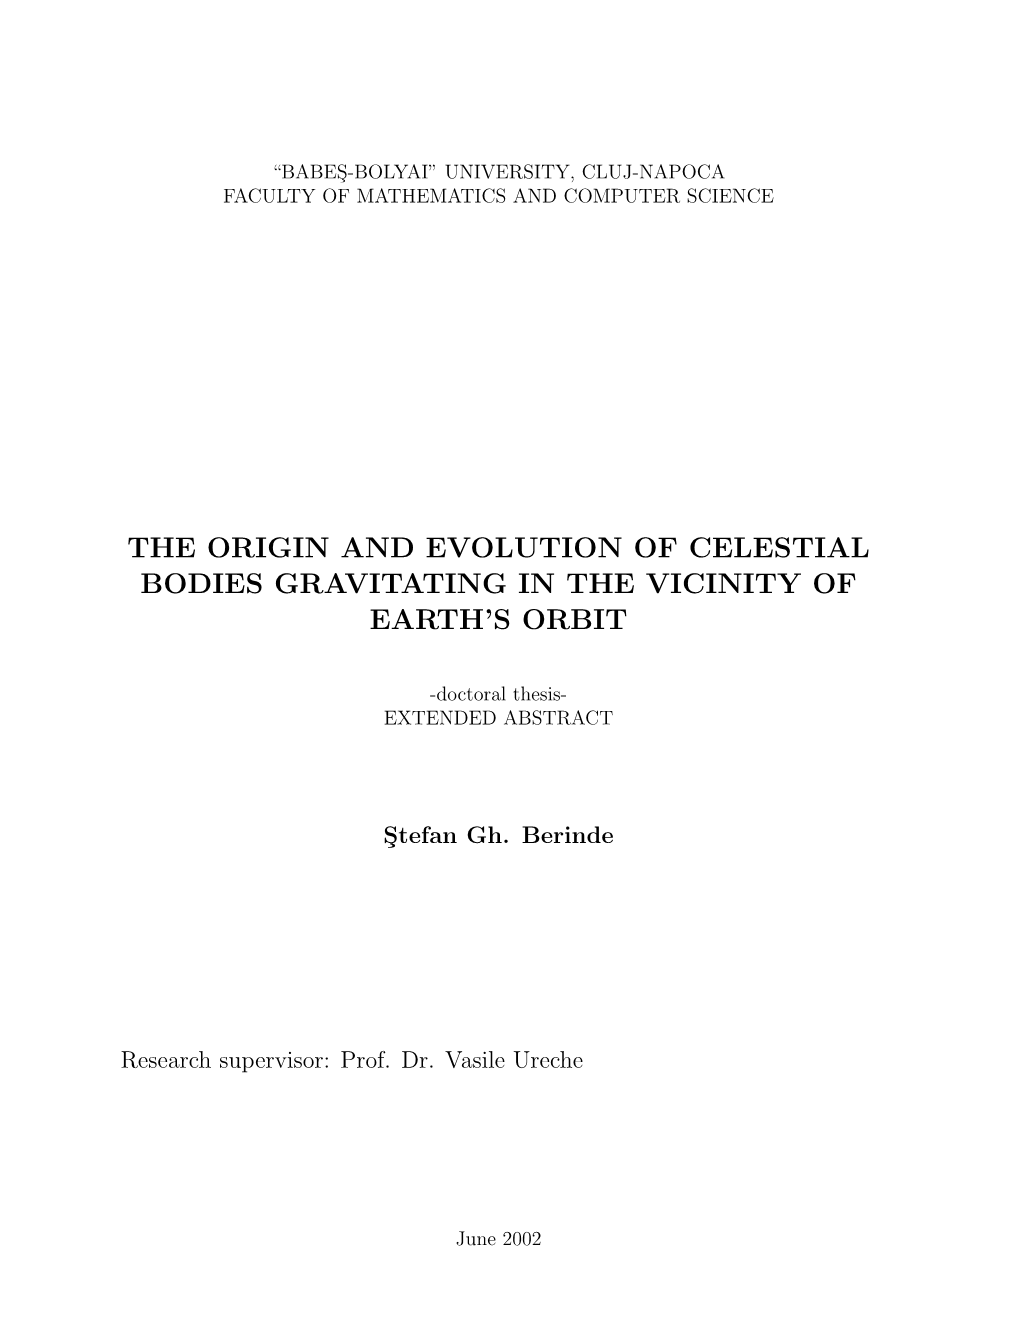 The Origin and Evolution of Celestial Bodies Gravitating in the Vicinity of Earth’S Orbit